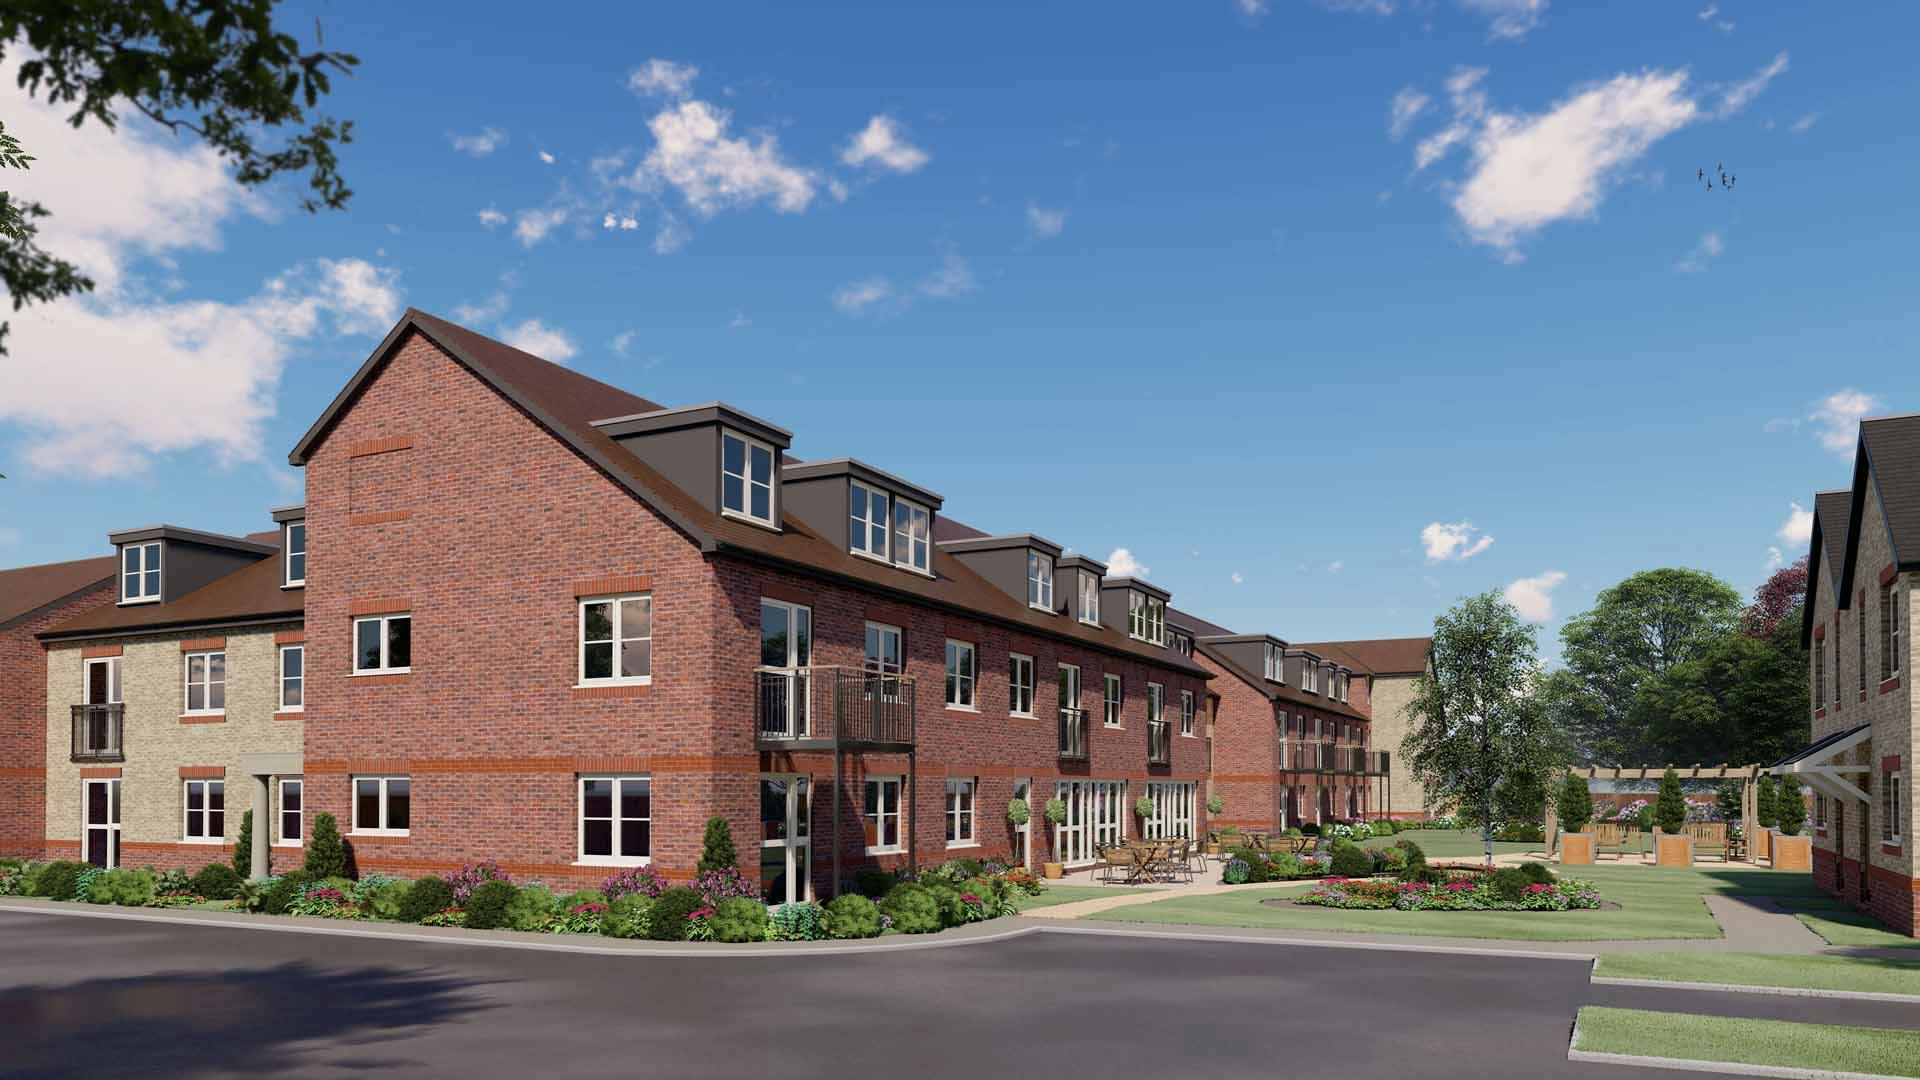 Exterior of Mere Lodge & Hartismere Mews Retirement Apartment in Diss, Norfolk